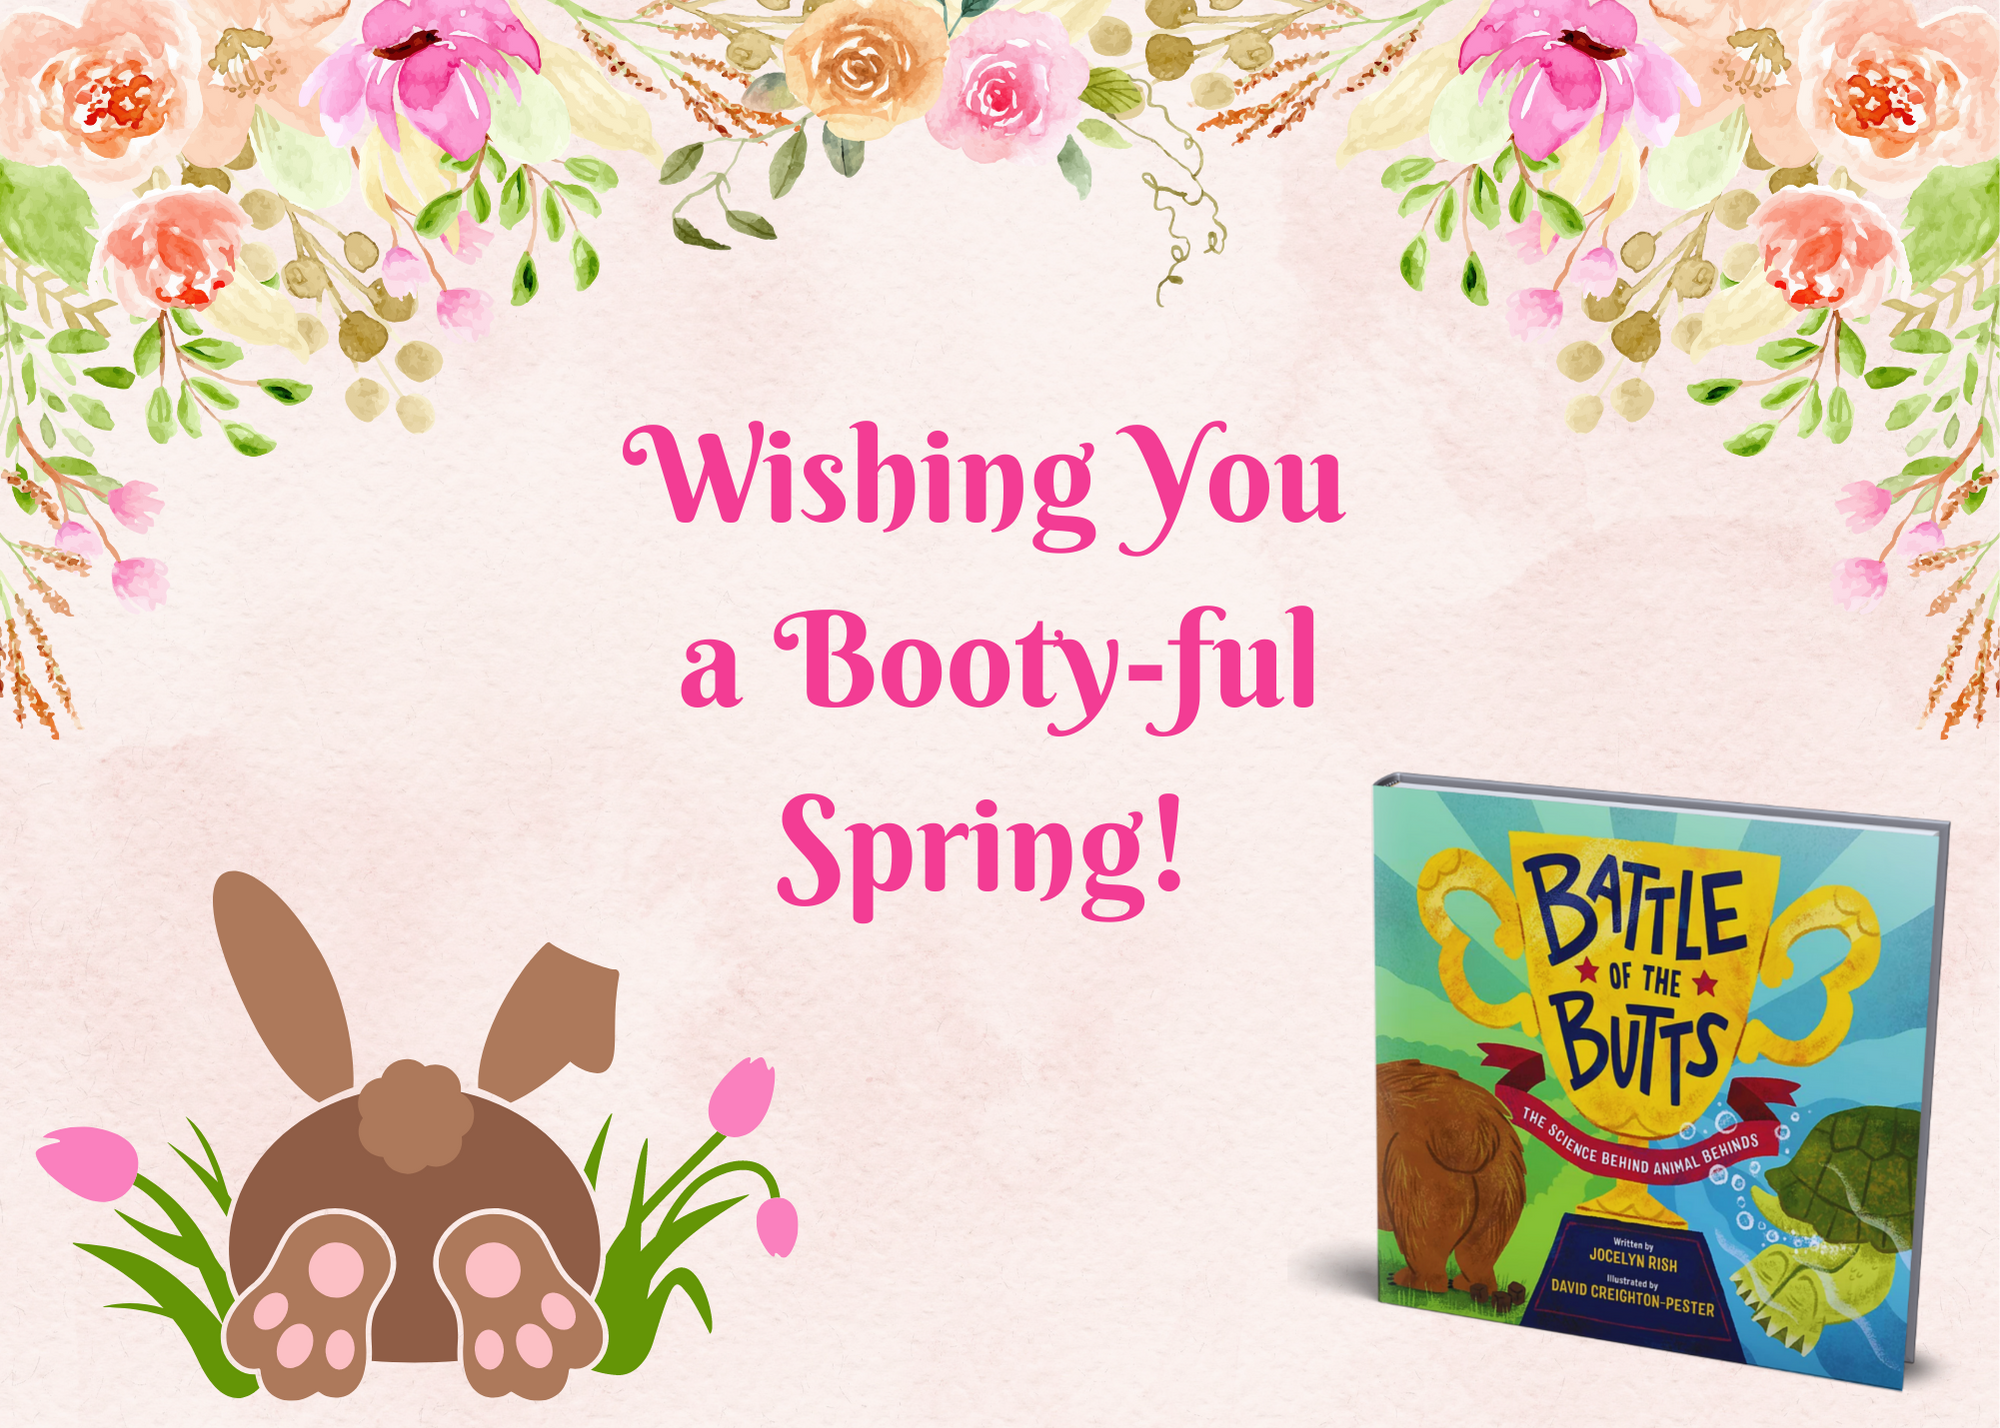 Flower and a bunny butt: "Wishing You a Booty-ful Spring"